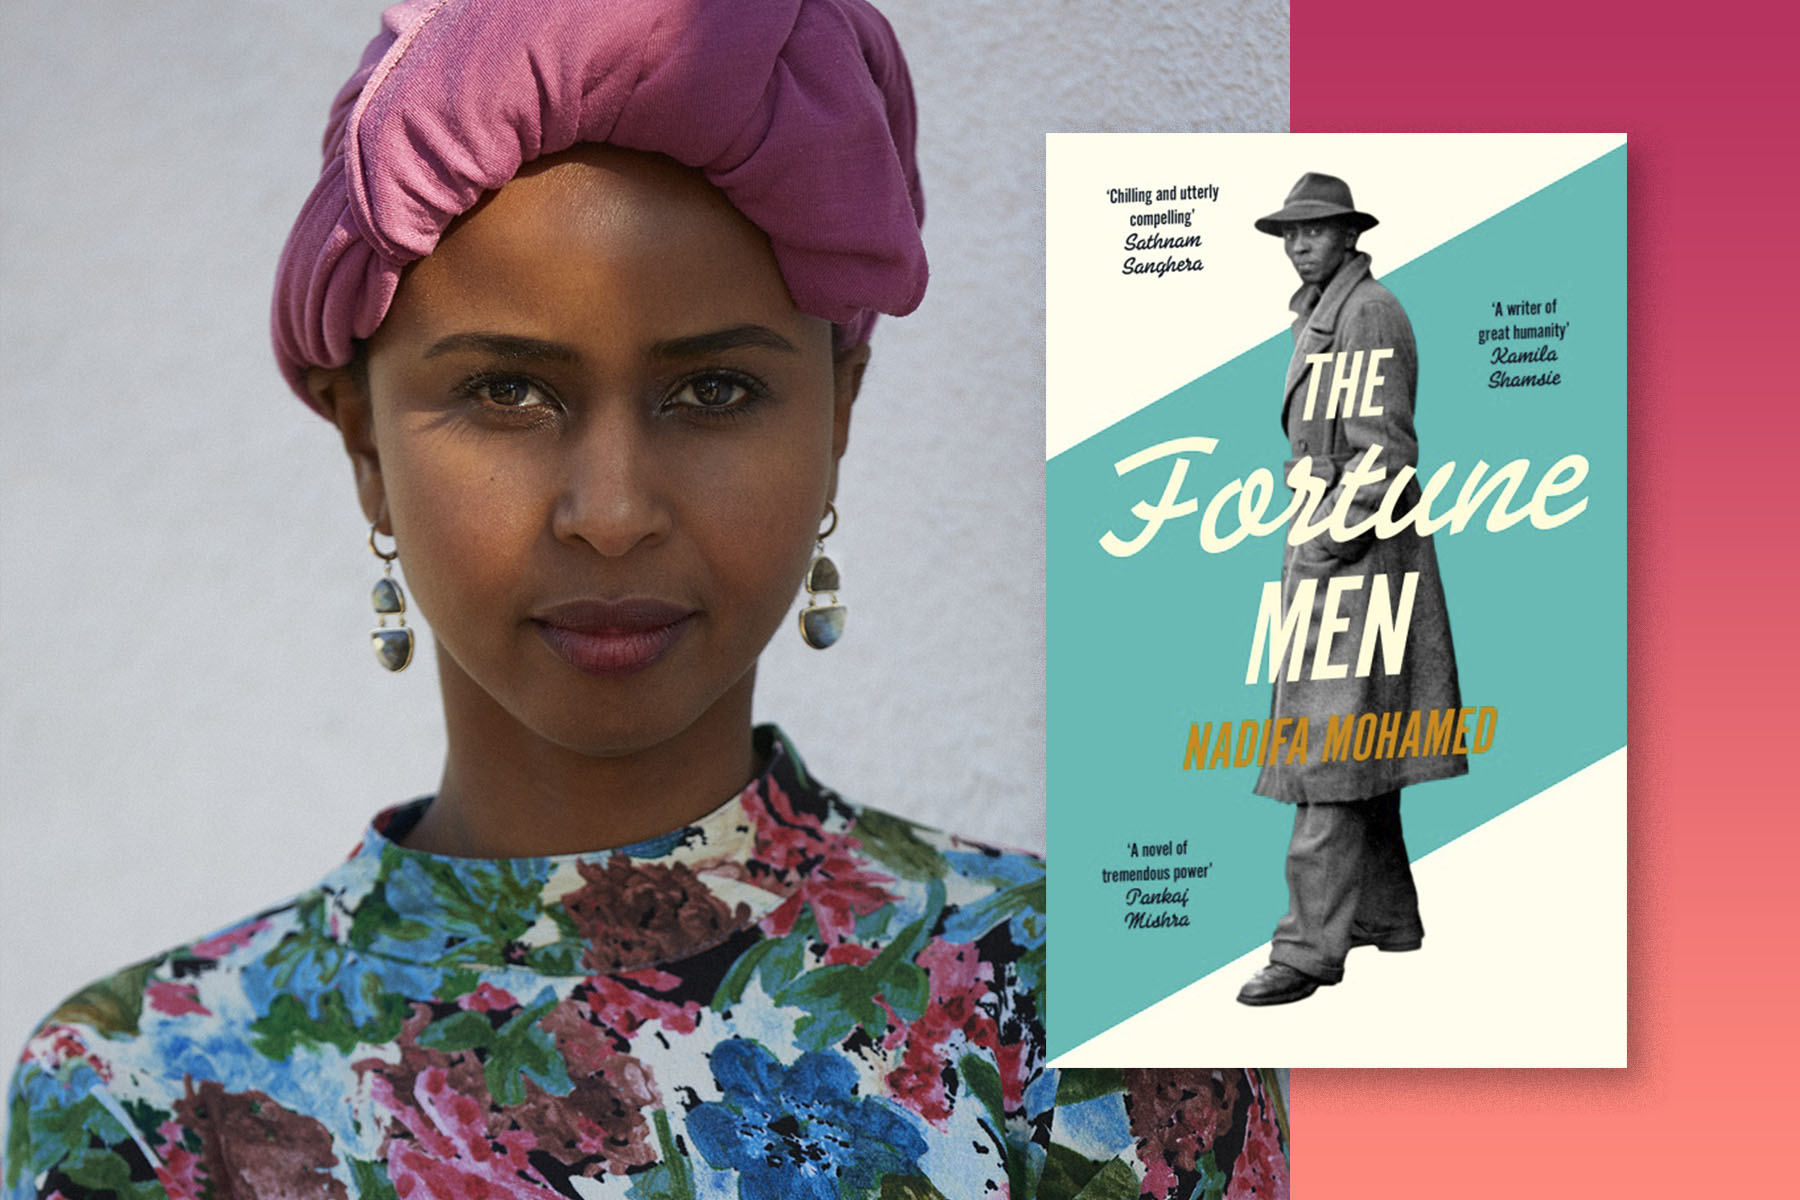 A photo of author Nadifa Mohamed on a grey background, with her book The Fortune Men overlaid next to her.